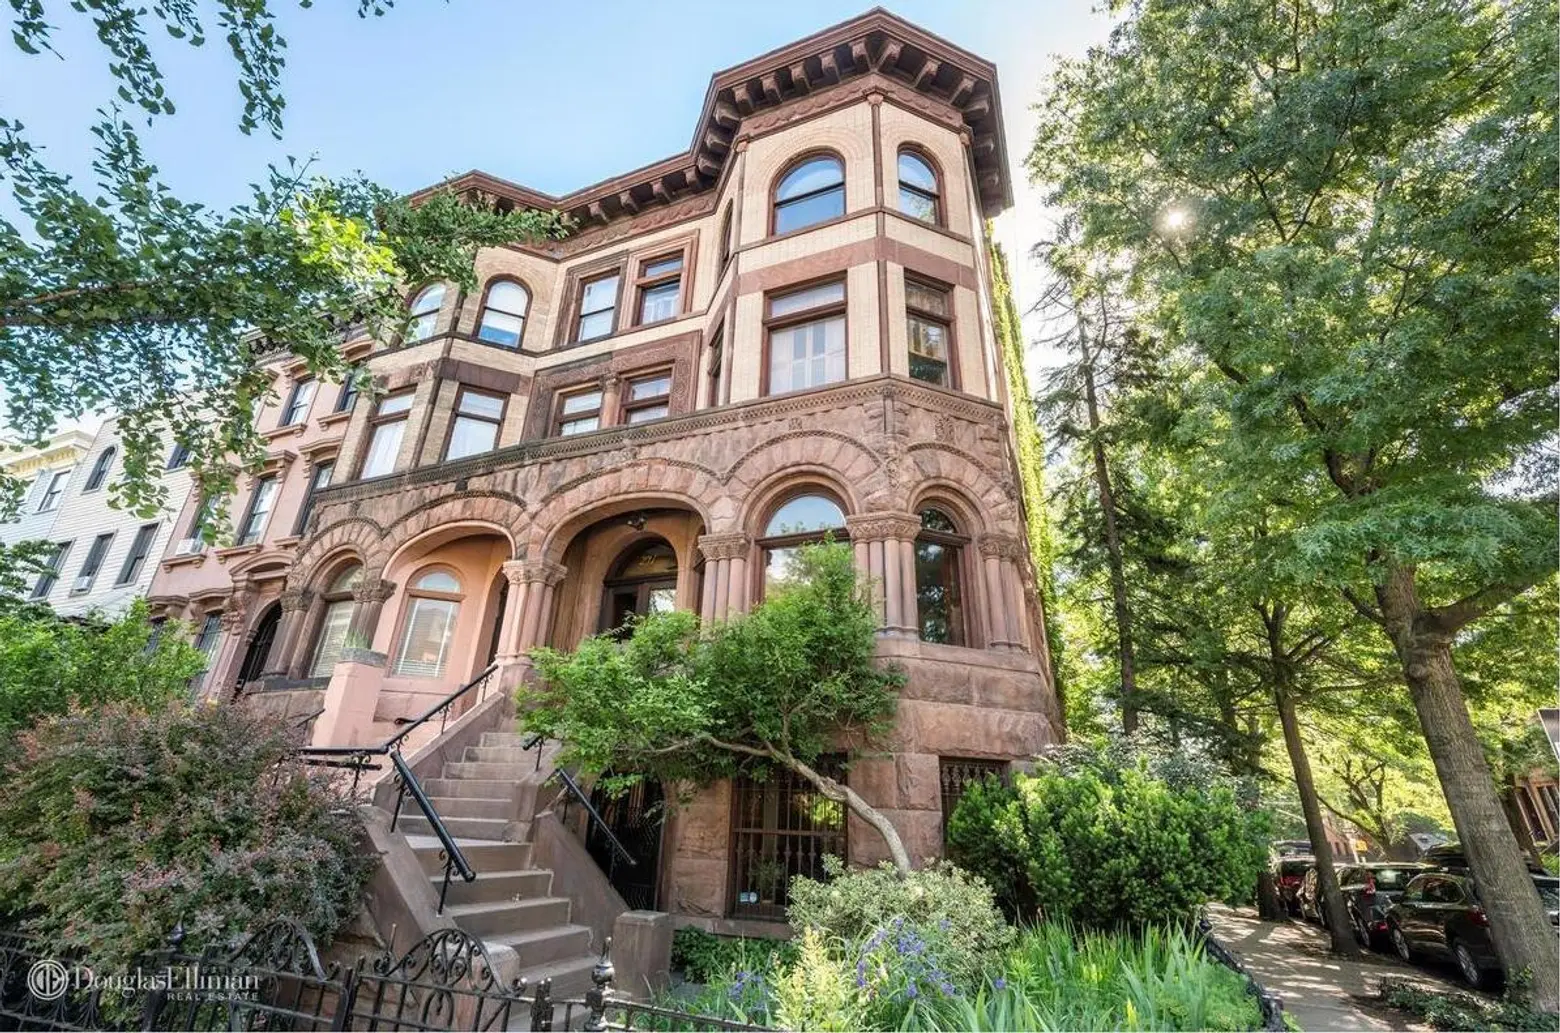 Asking $3.75M, this corner townhouse in Clinton Hill has an art studio and romantic garden